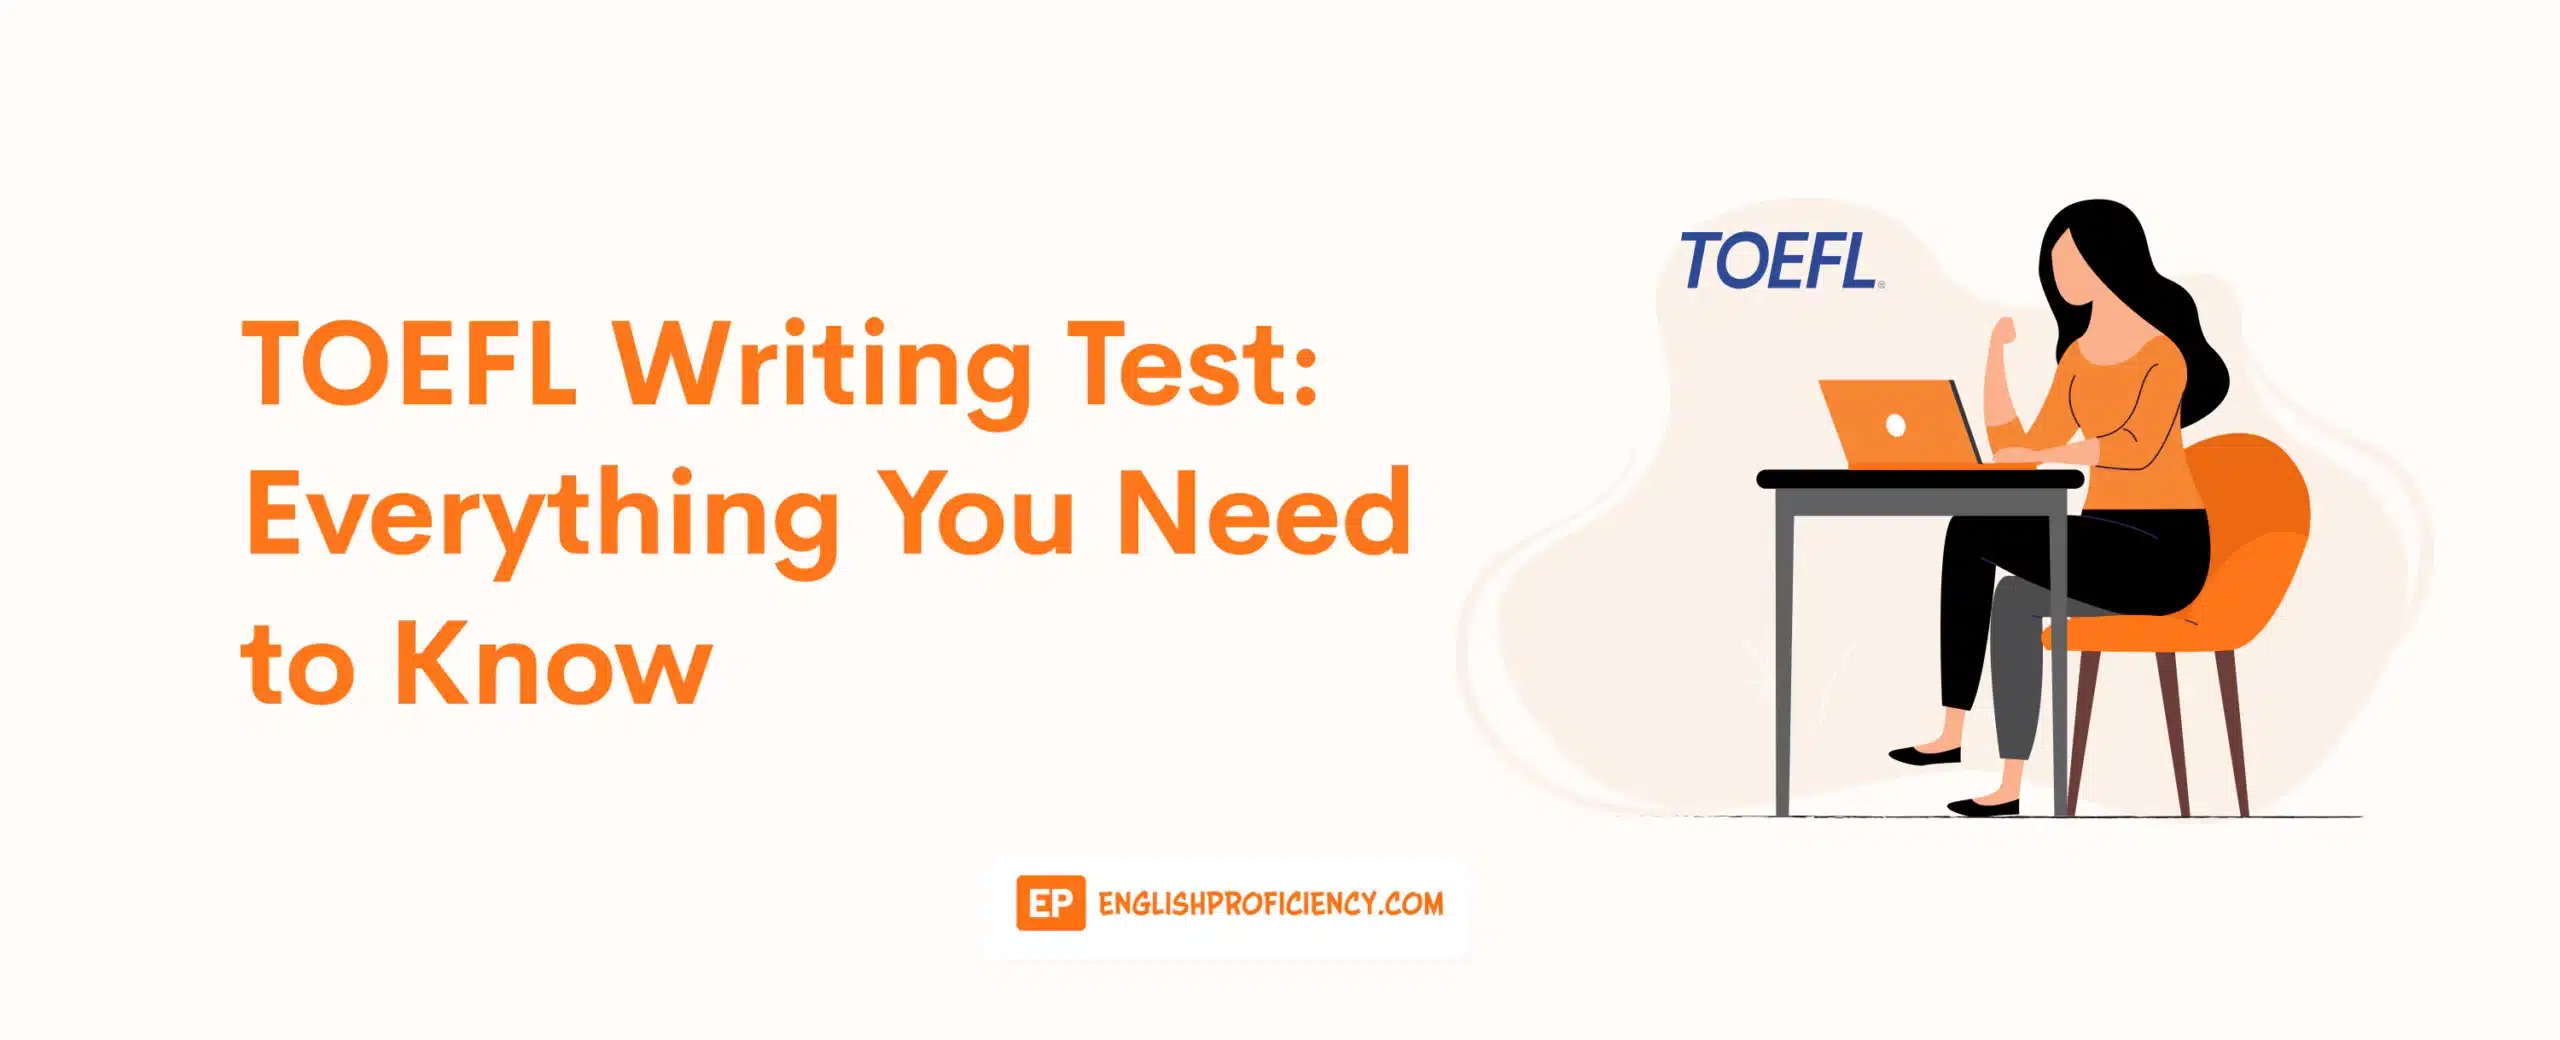 TOEFL Writing Test Everything You Need to Know